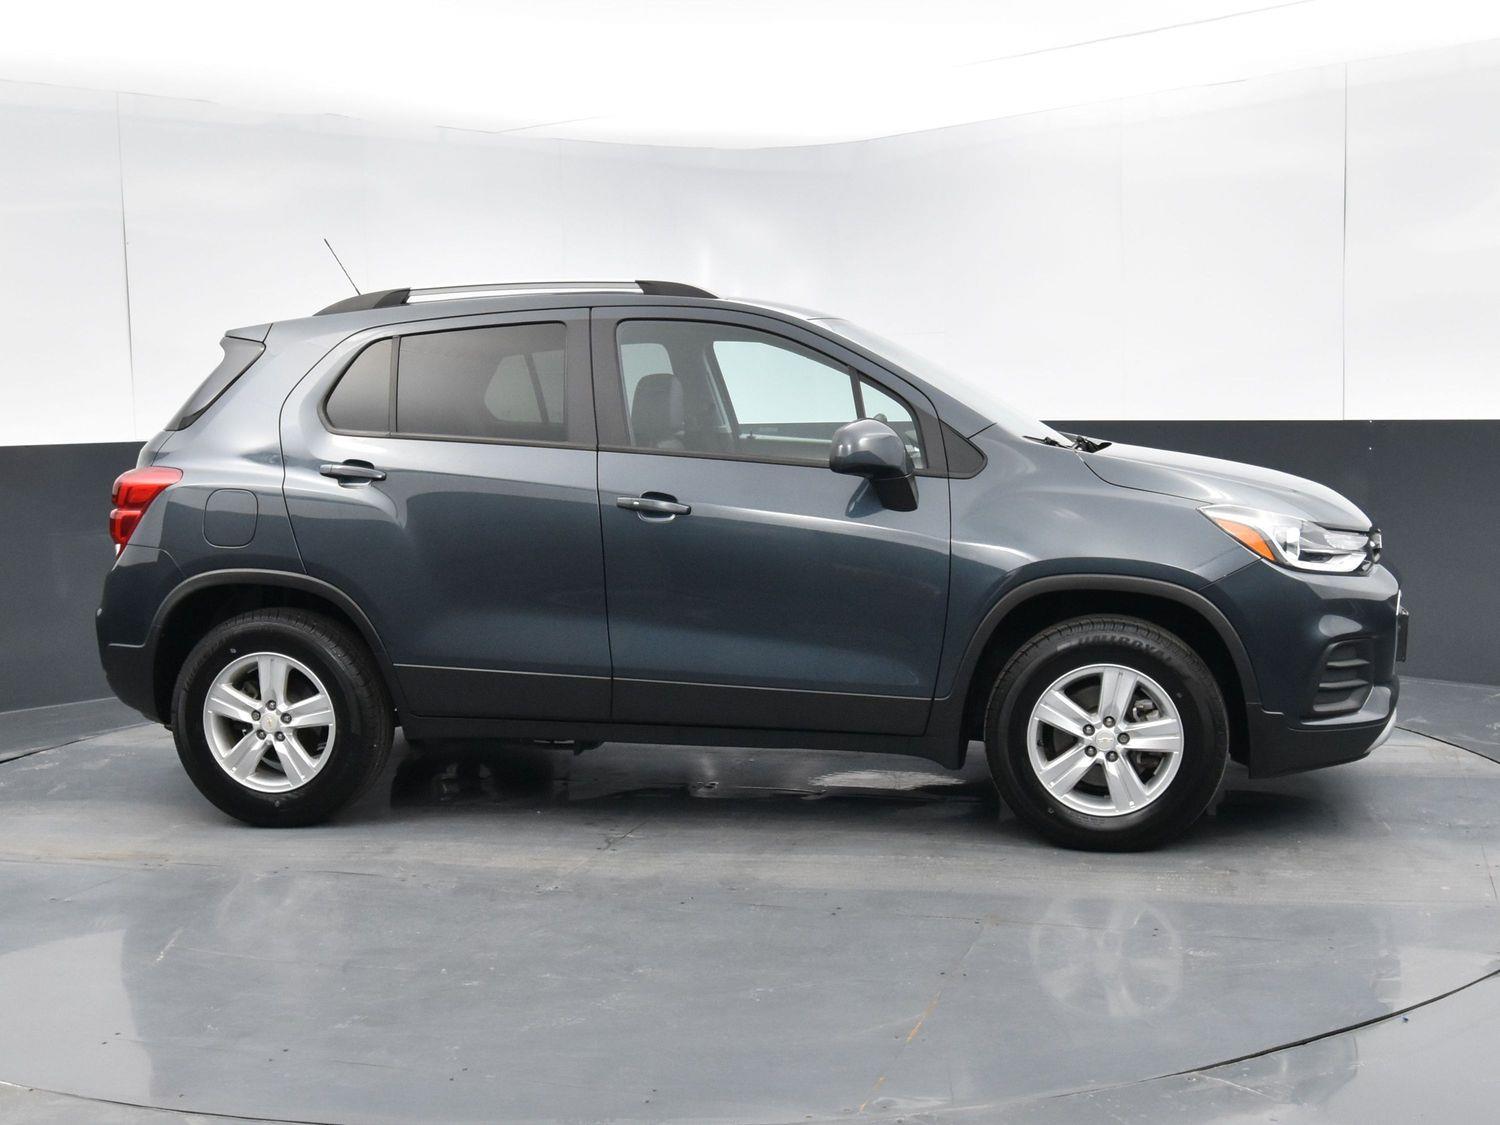 Used 2021 Chevrolet Trax LT Sport Utility Vehicle for sale in Grand Island NE